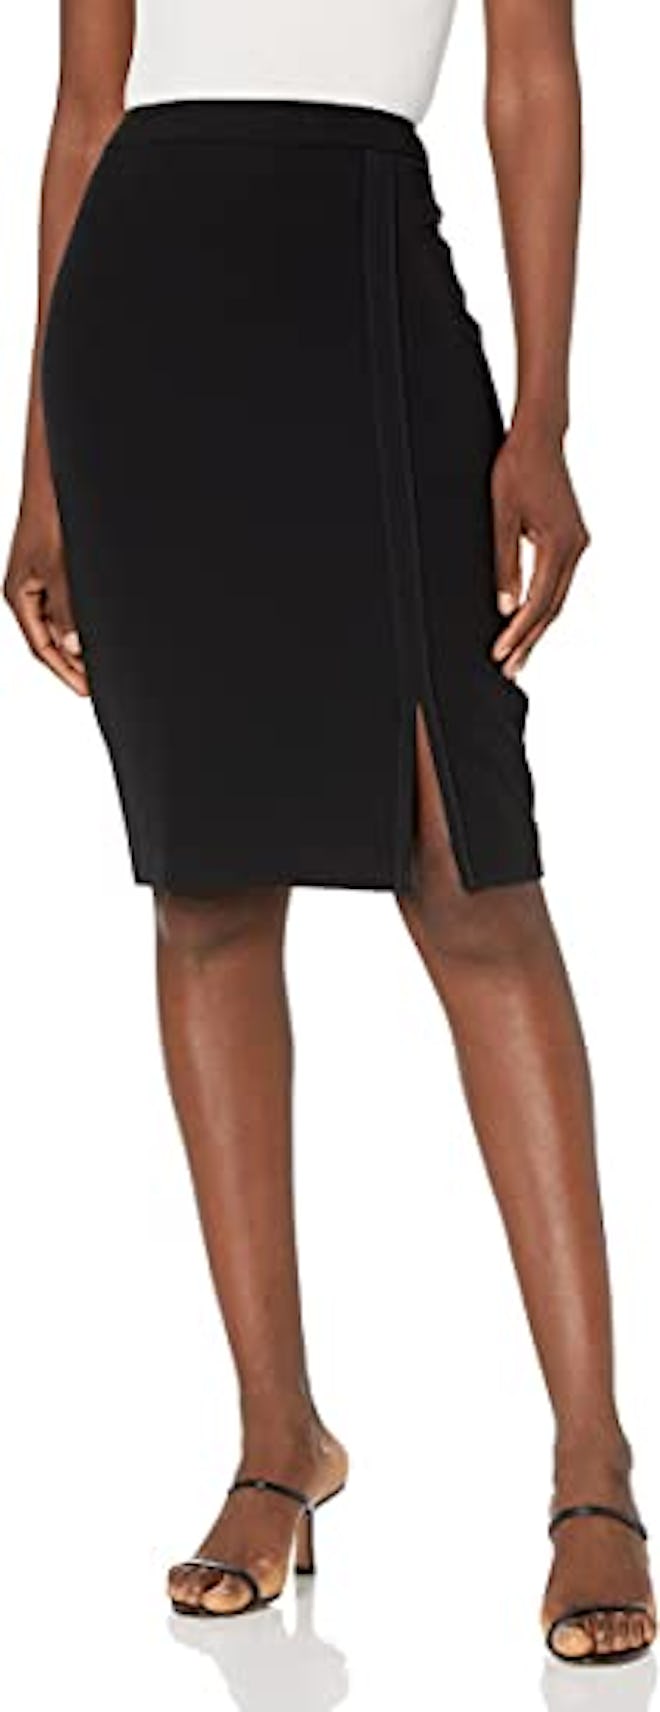 A leg-showcasing side slit makes this Tommy Hilfiger option one of the best pencil skirts.